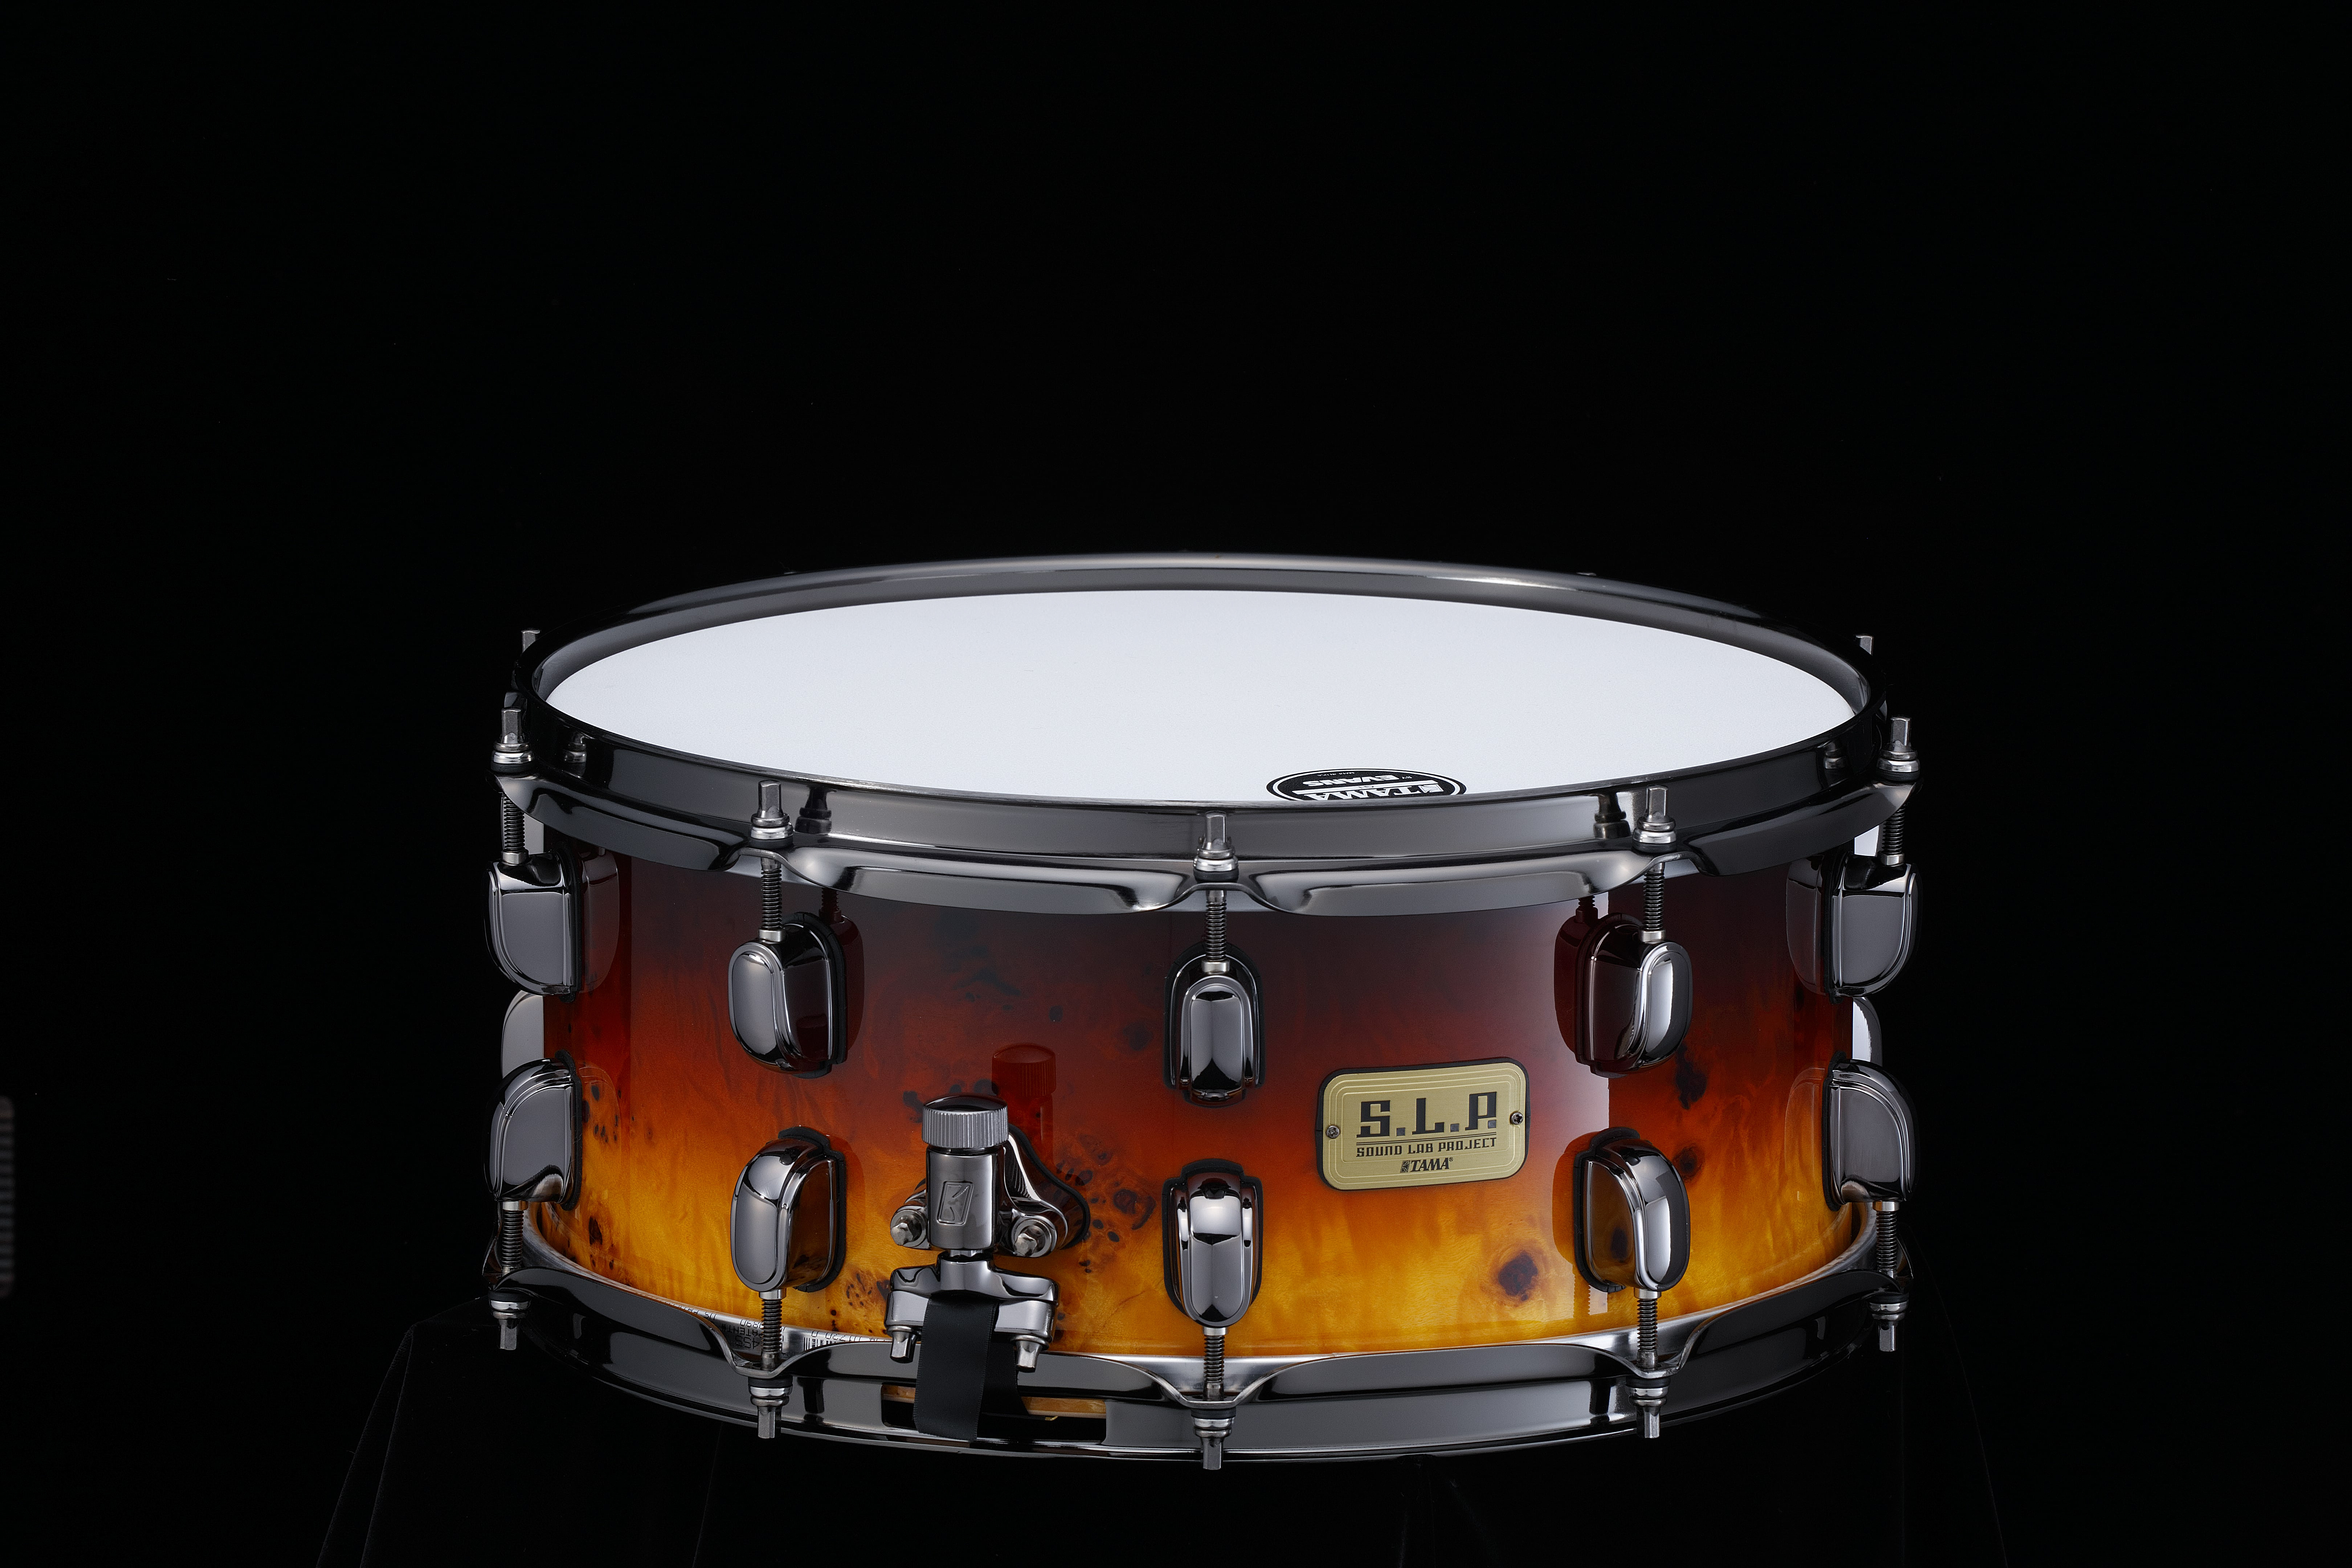 TAMA LGK146-ASF S.L.P. 14"X6" G-KAPUR SNARE DRUM W/ MAPPA BURL OUTER PLY -LIMITED PRODUCT- – фото 6